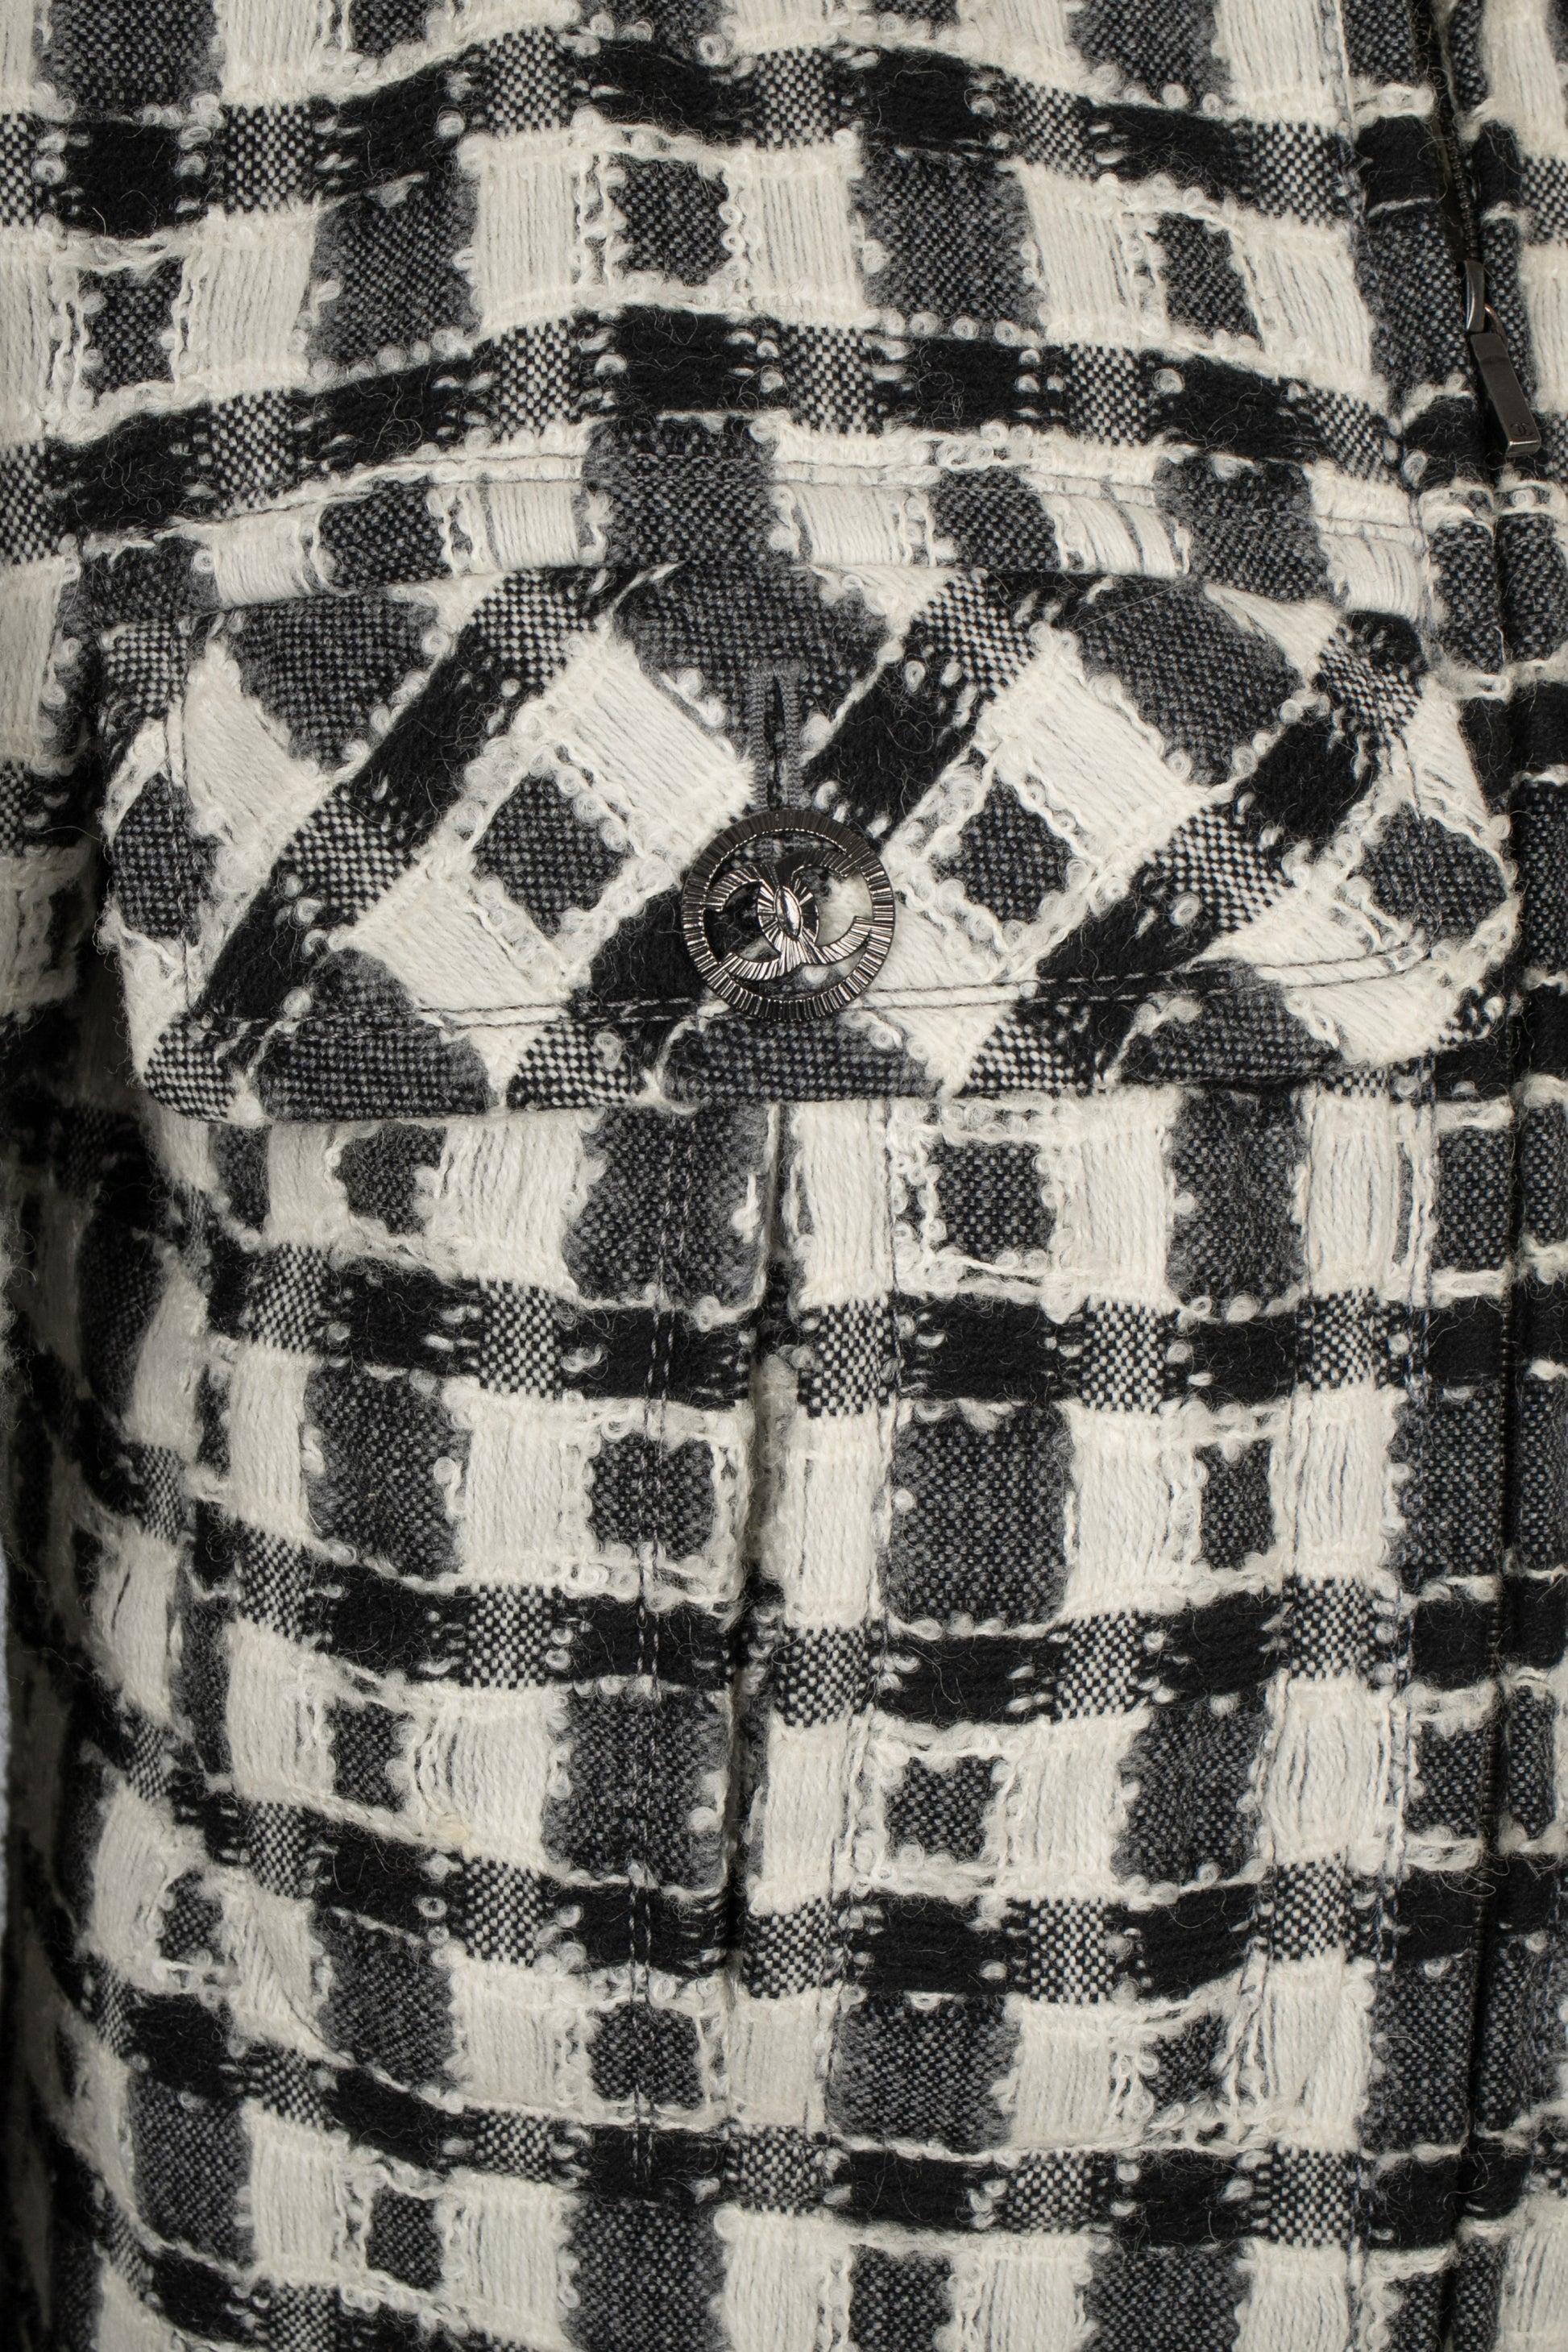 Chanel Short Jacket in Black and White Tweed, Silk Lining 4